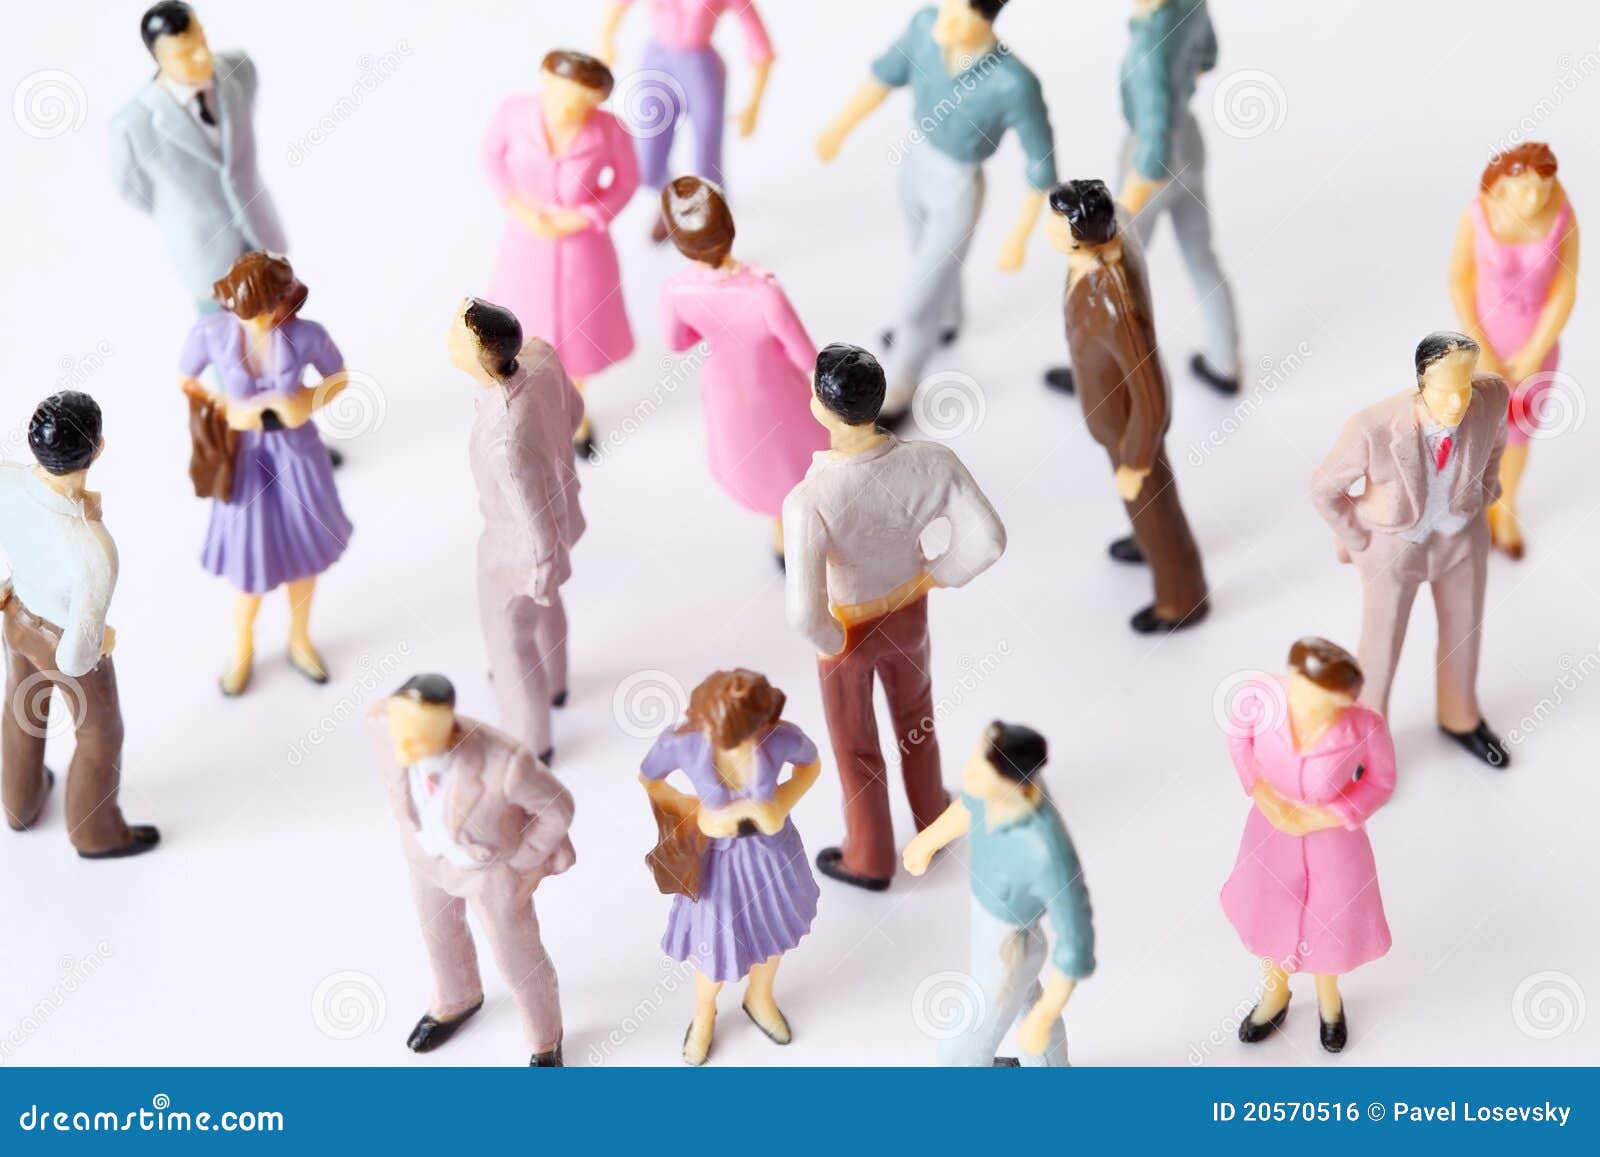 miniature toy people stand in different poses